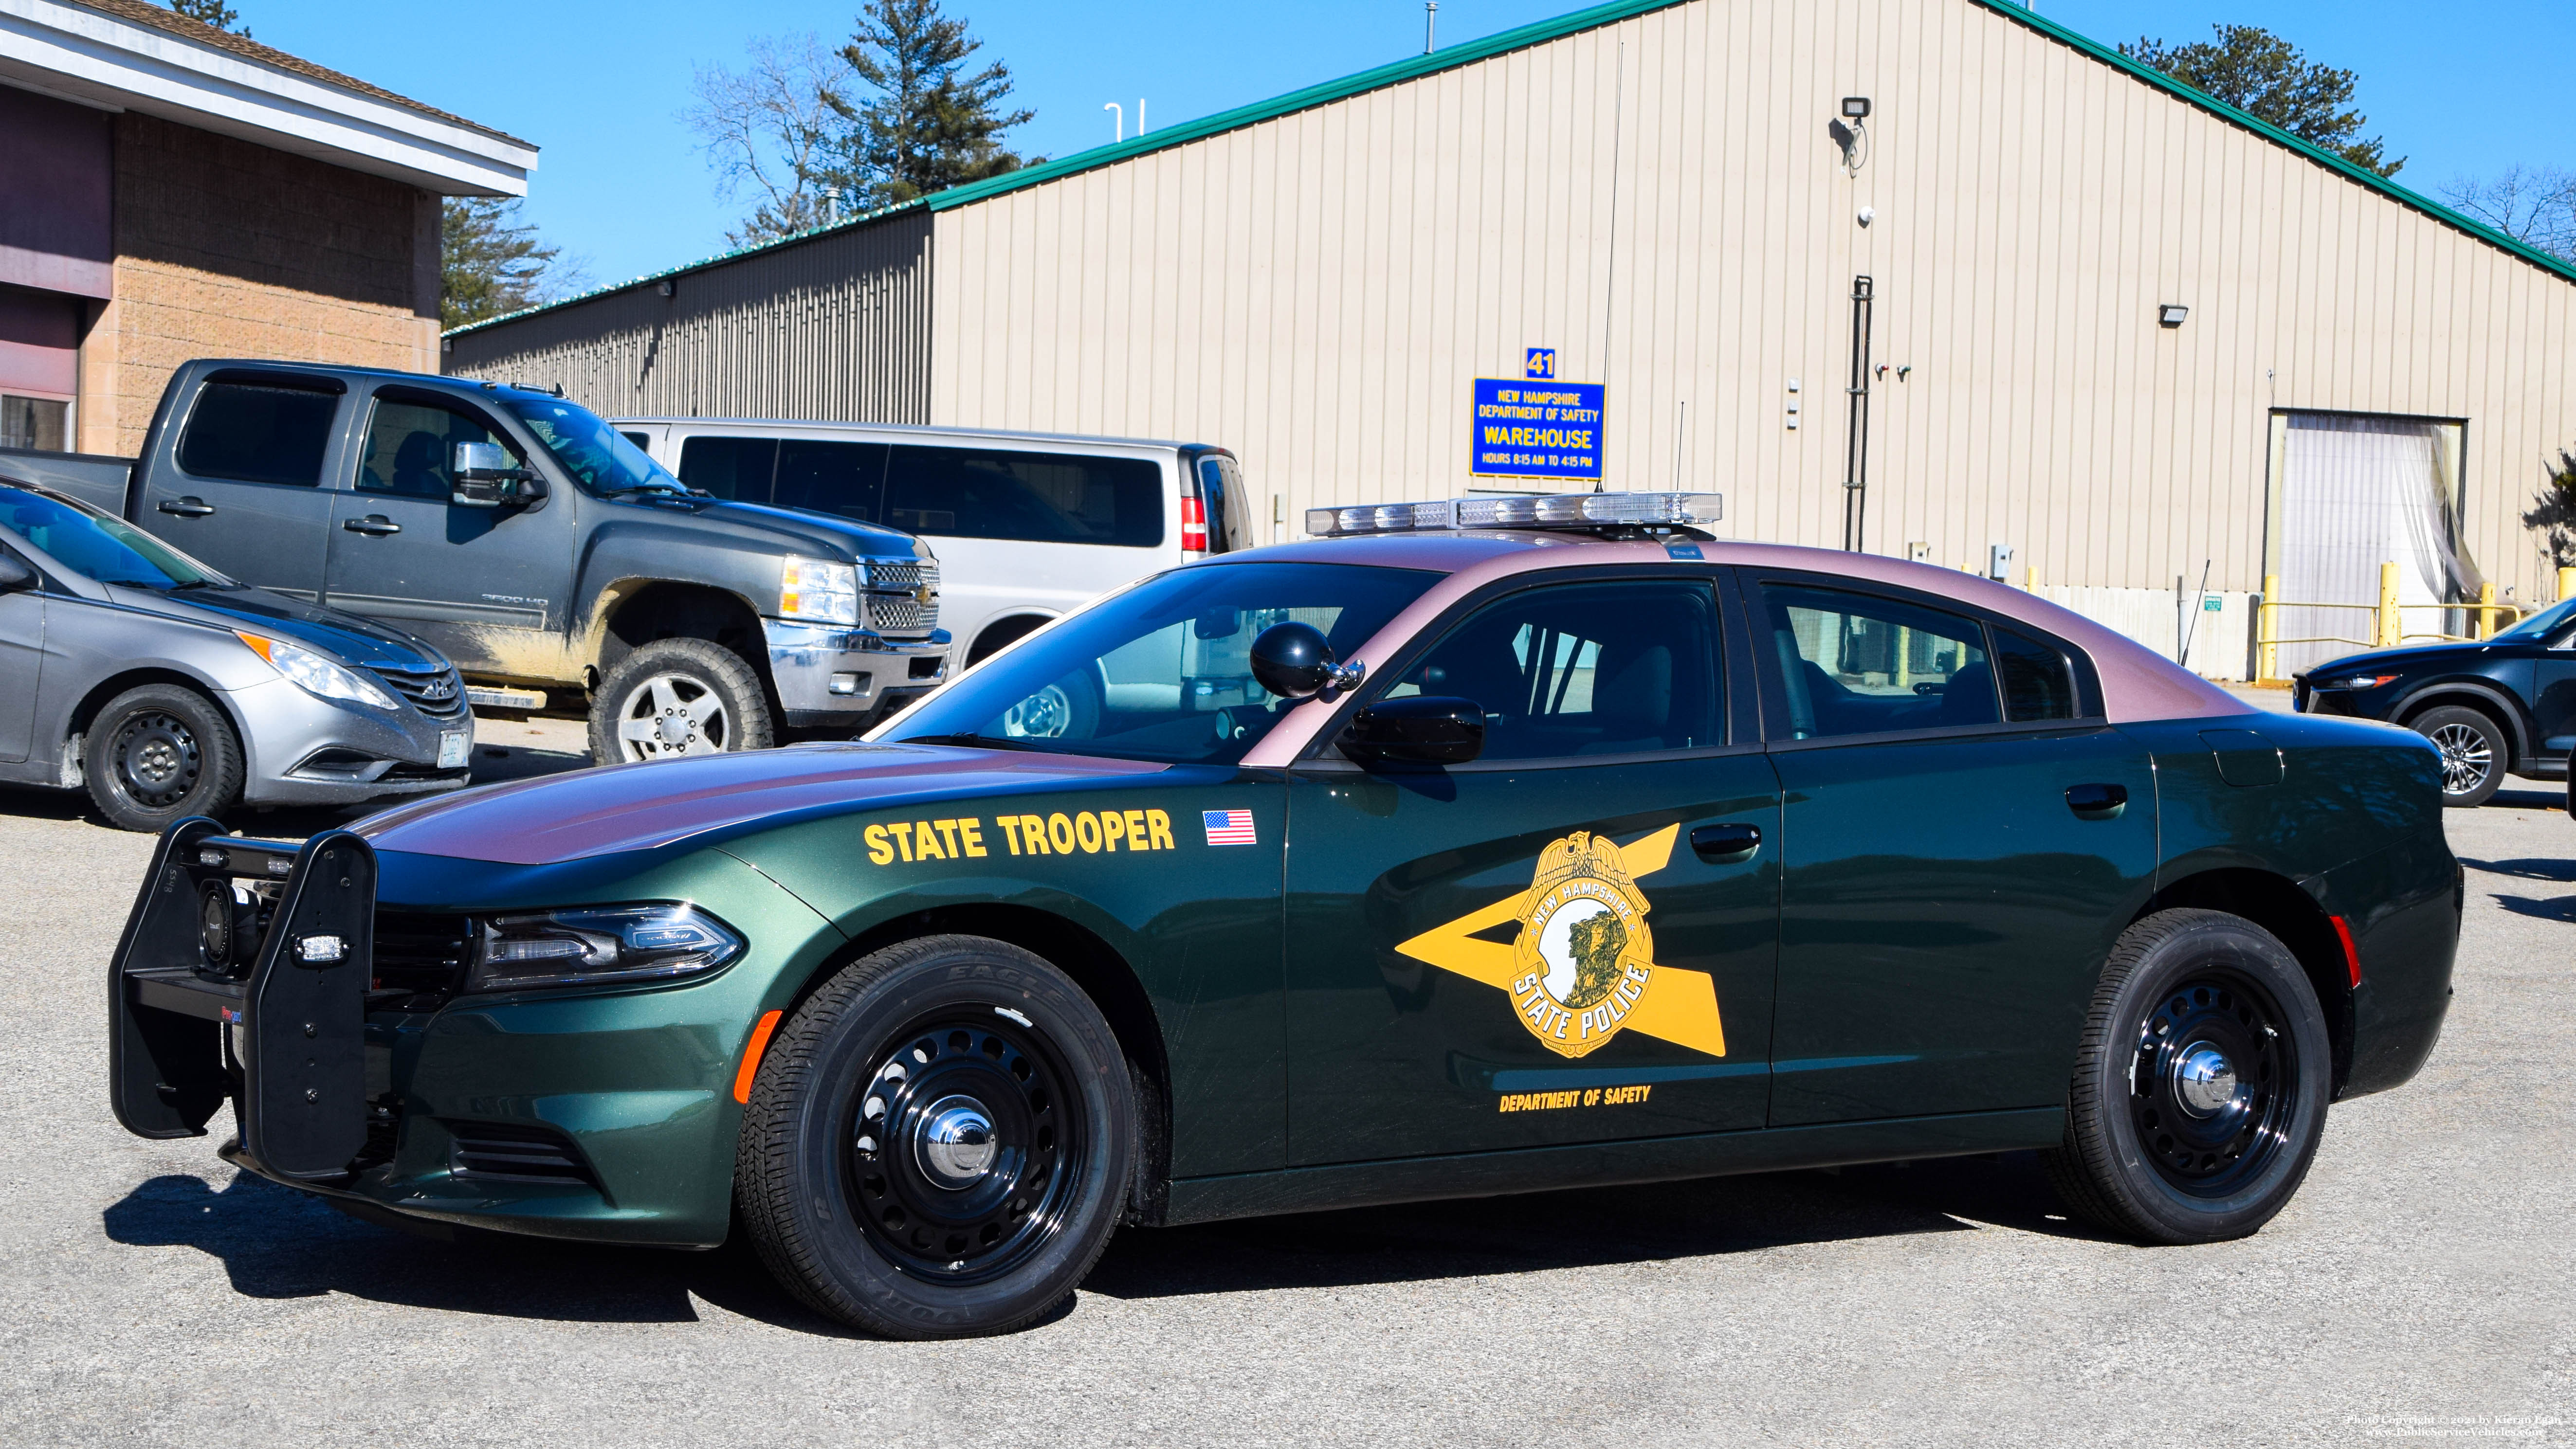 A photo  of New Hampshire State Police
            Cruiser 510, a 2020 Dodge Charger             taken by Kieran Egan